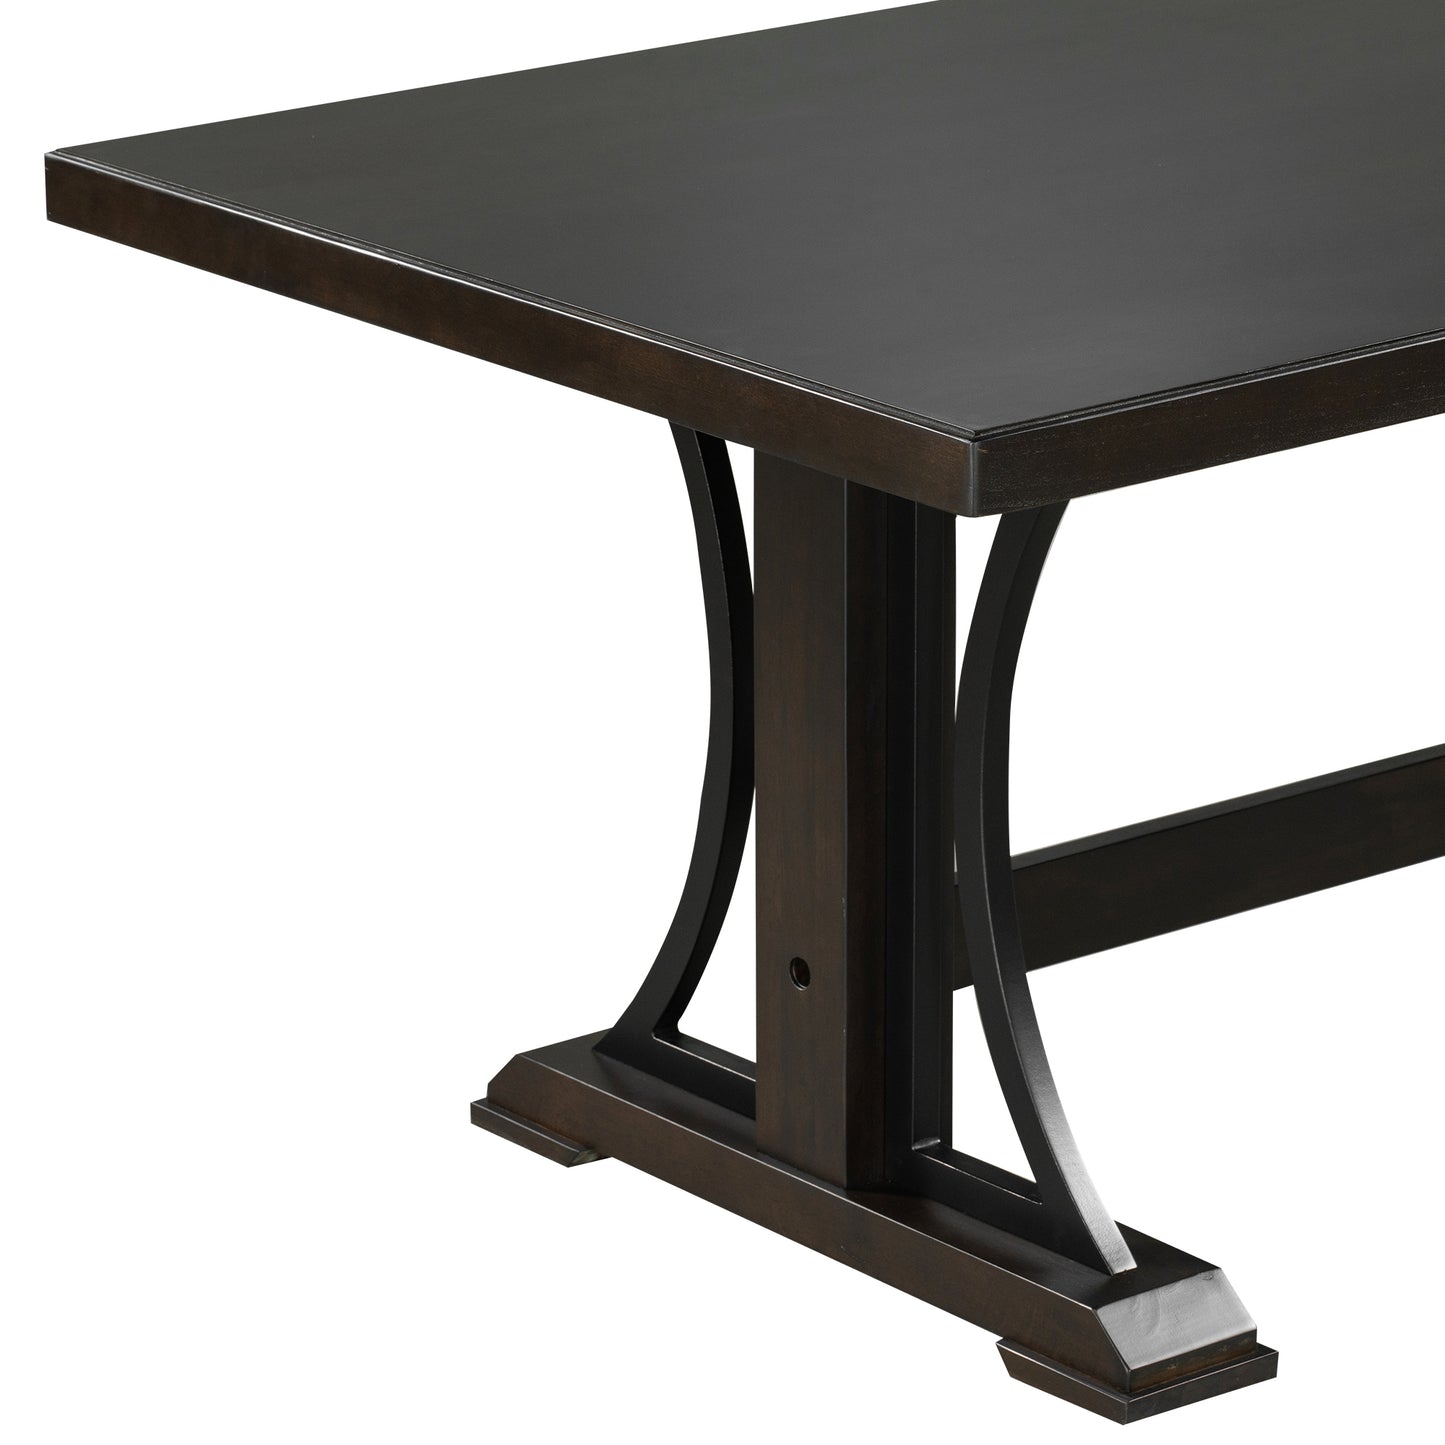 TREXM Retro Style Dining Table 78"Wood Rectangular Table, Seats up to 8 (Espresso)